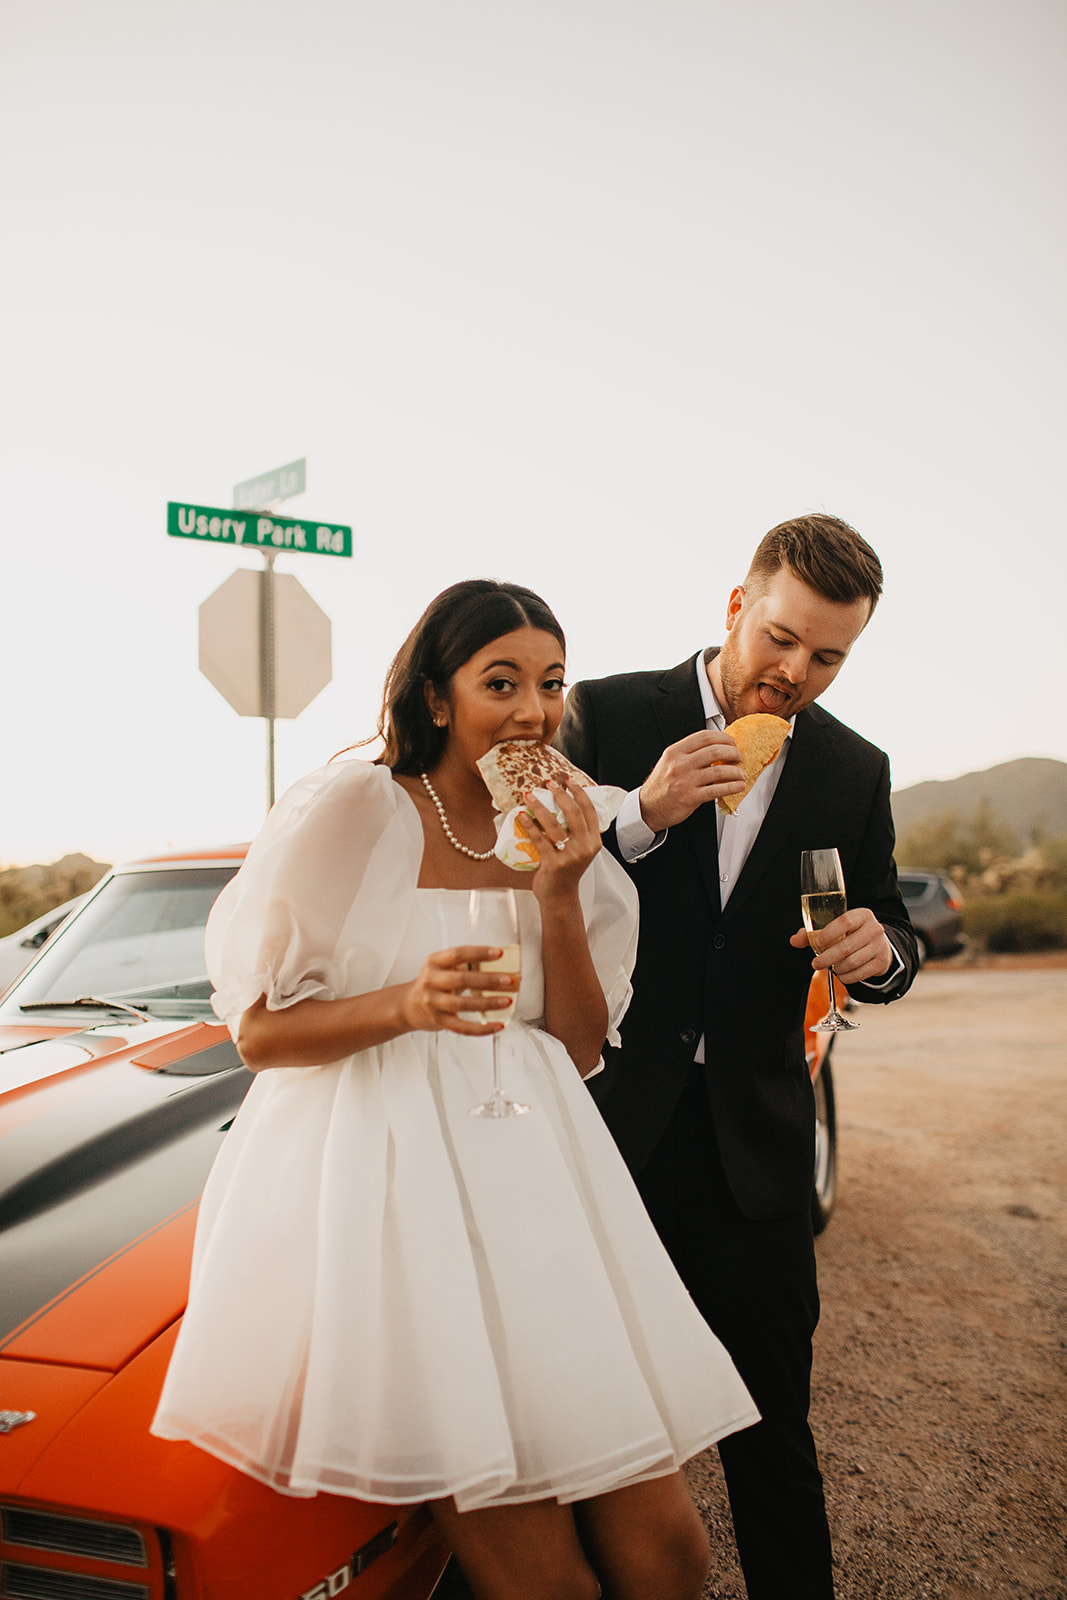 couples eating taco bell in front of a vintage car while holding champagne